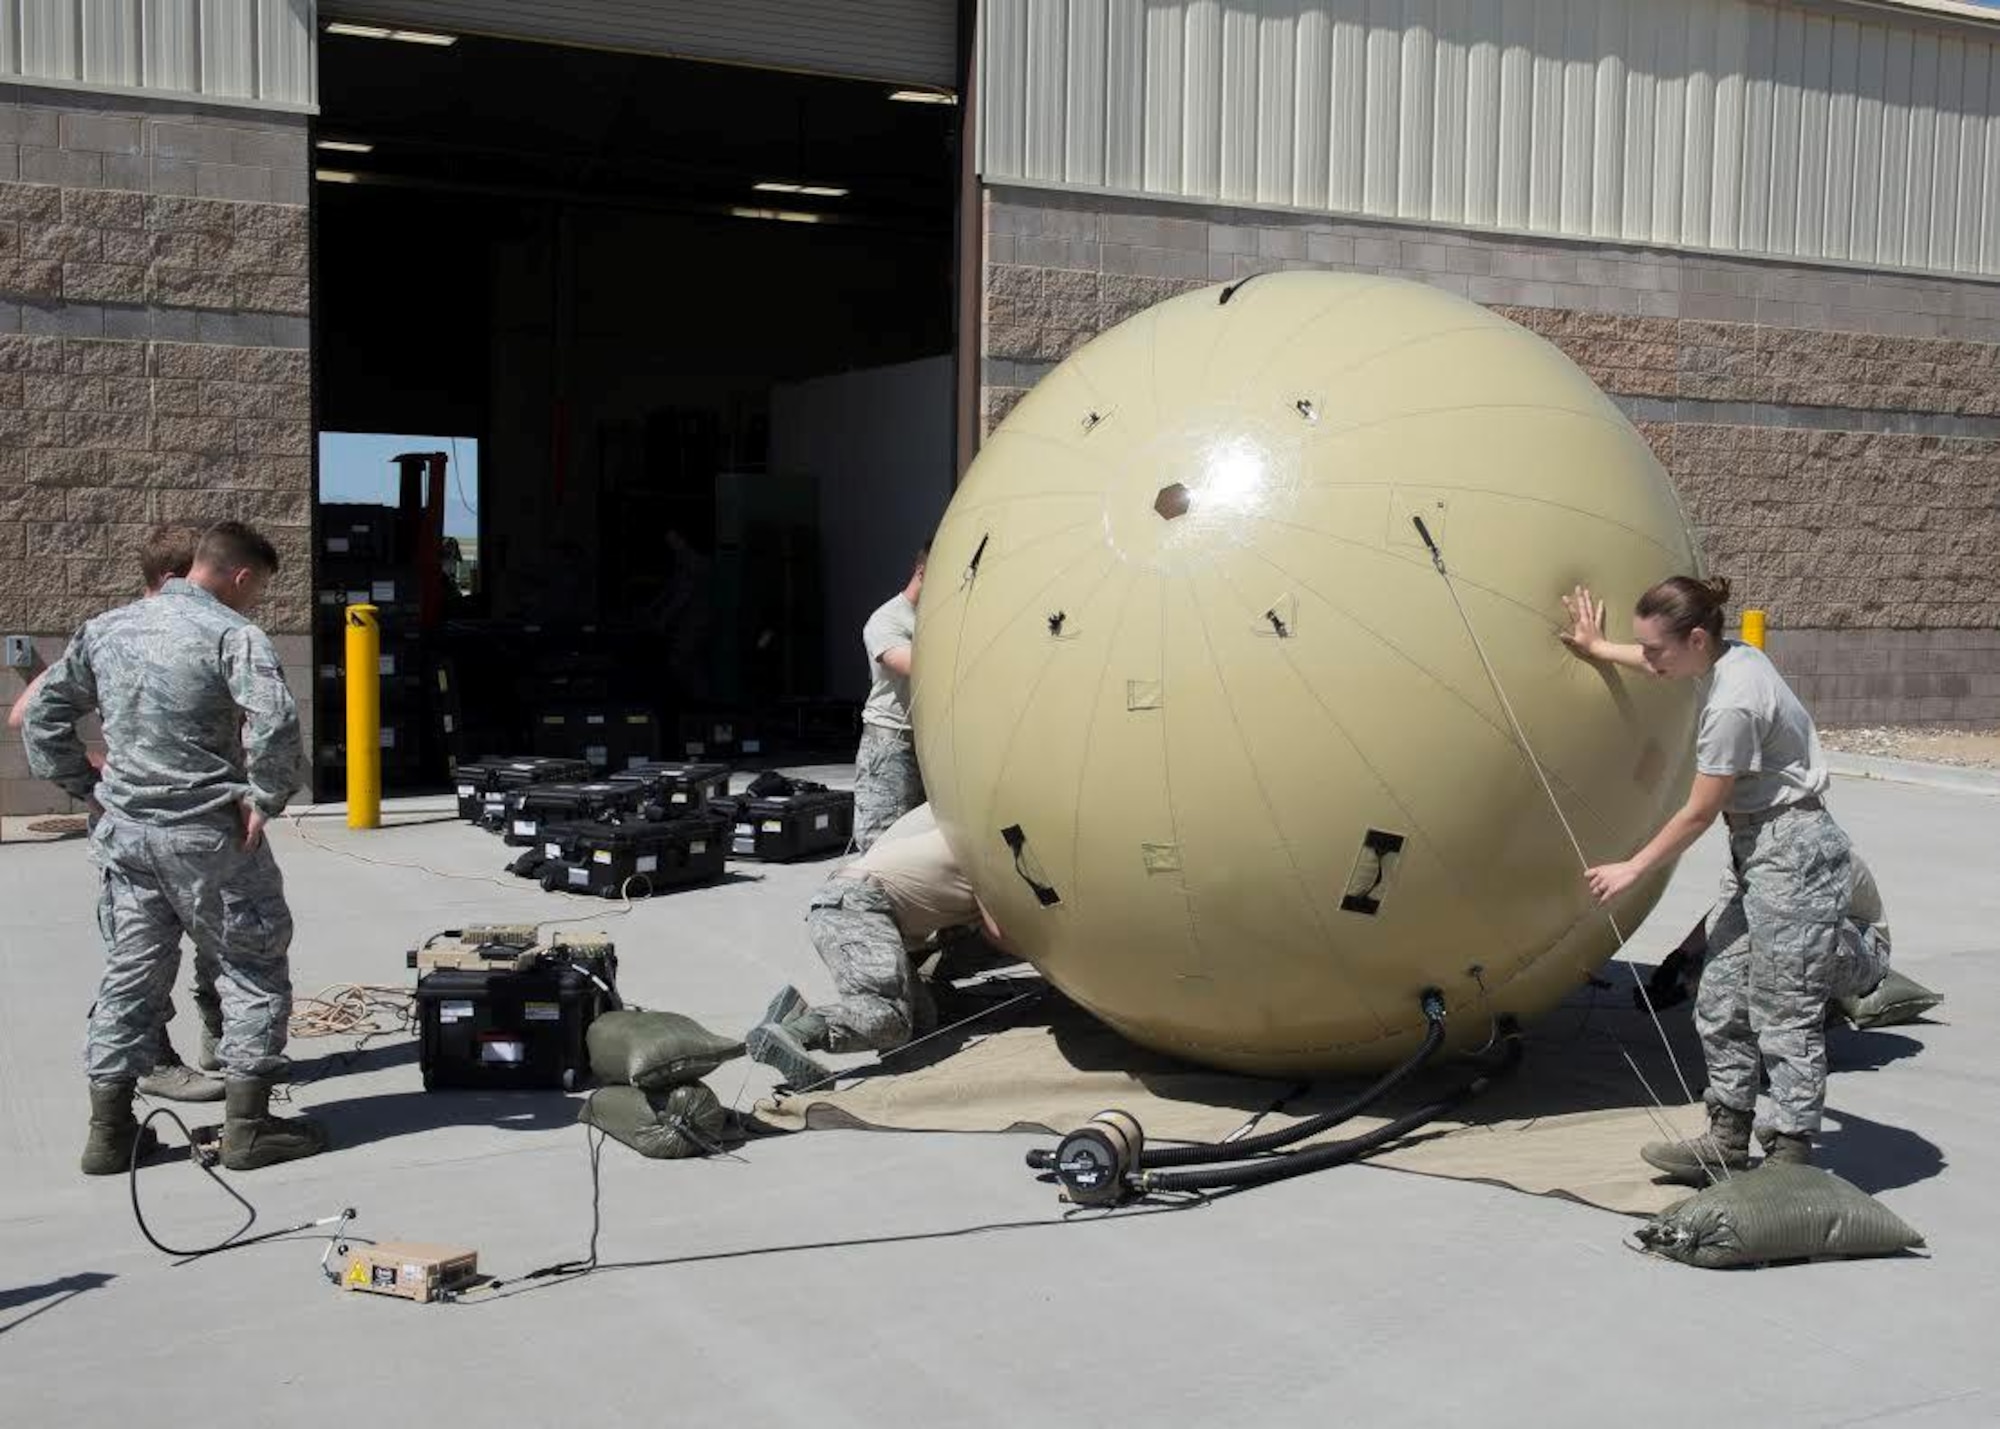 Members of the 726th Air Control Squadron assemble a Small Communications Package May 30, 2017, at Mountain Home Air Force Base, Idaho.  The inflatable system allows smaller teams to transport and employ it without relying on outside agencies. (U.S. Air Force photo by Airman 1st Class Jeremy D. Wolff/Released)